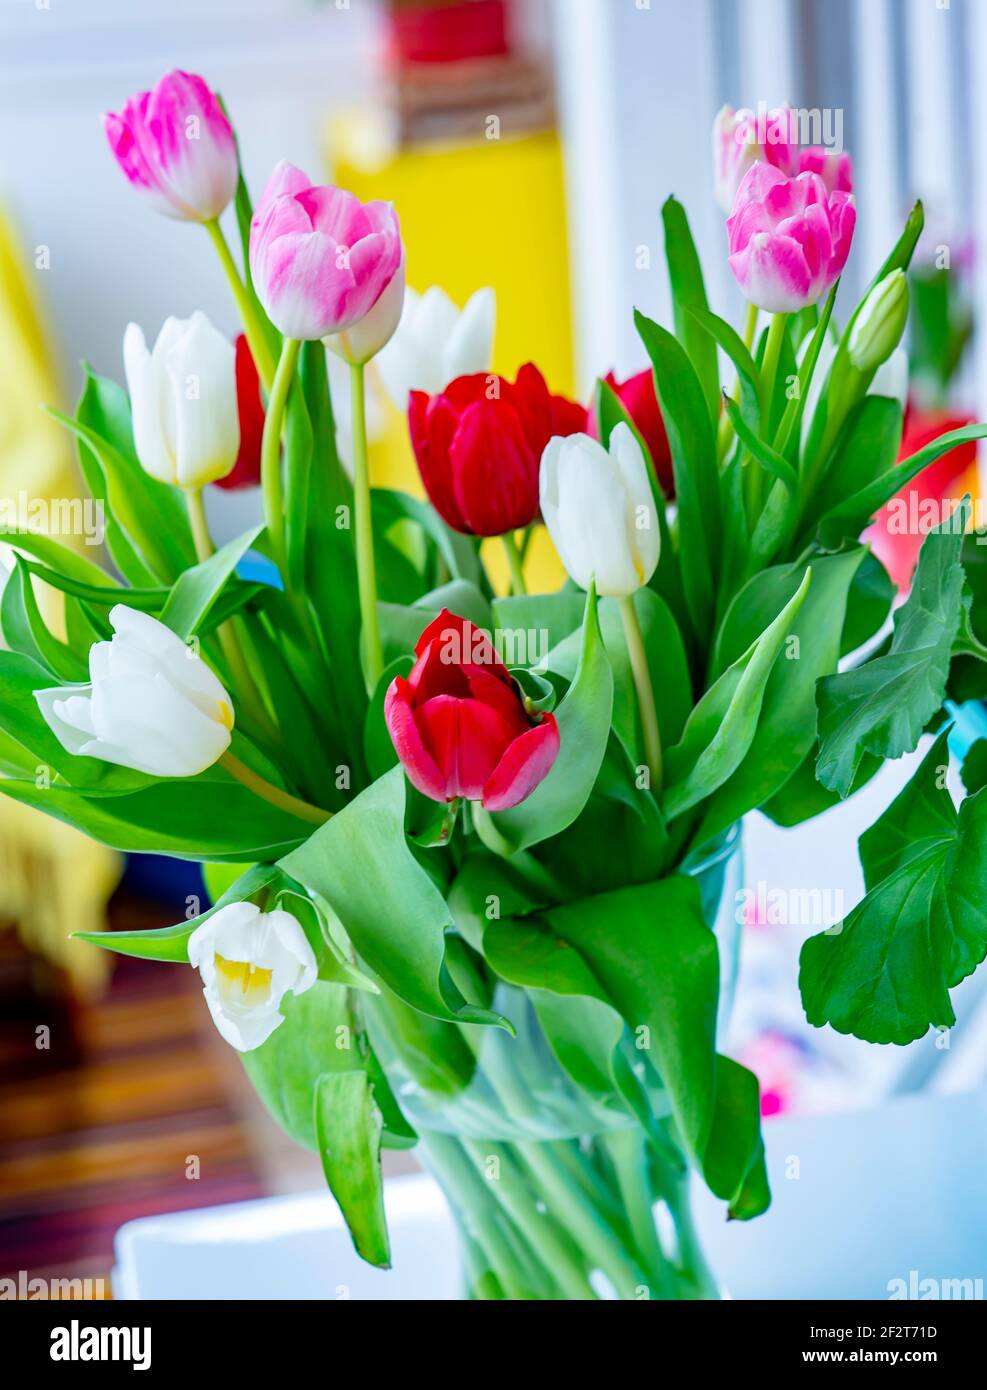 A bouquet of colorful tulips Stock Photo